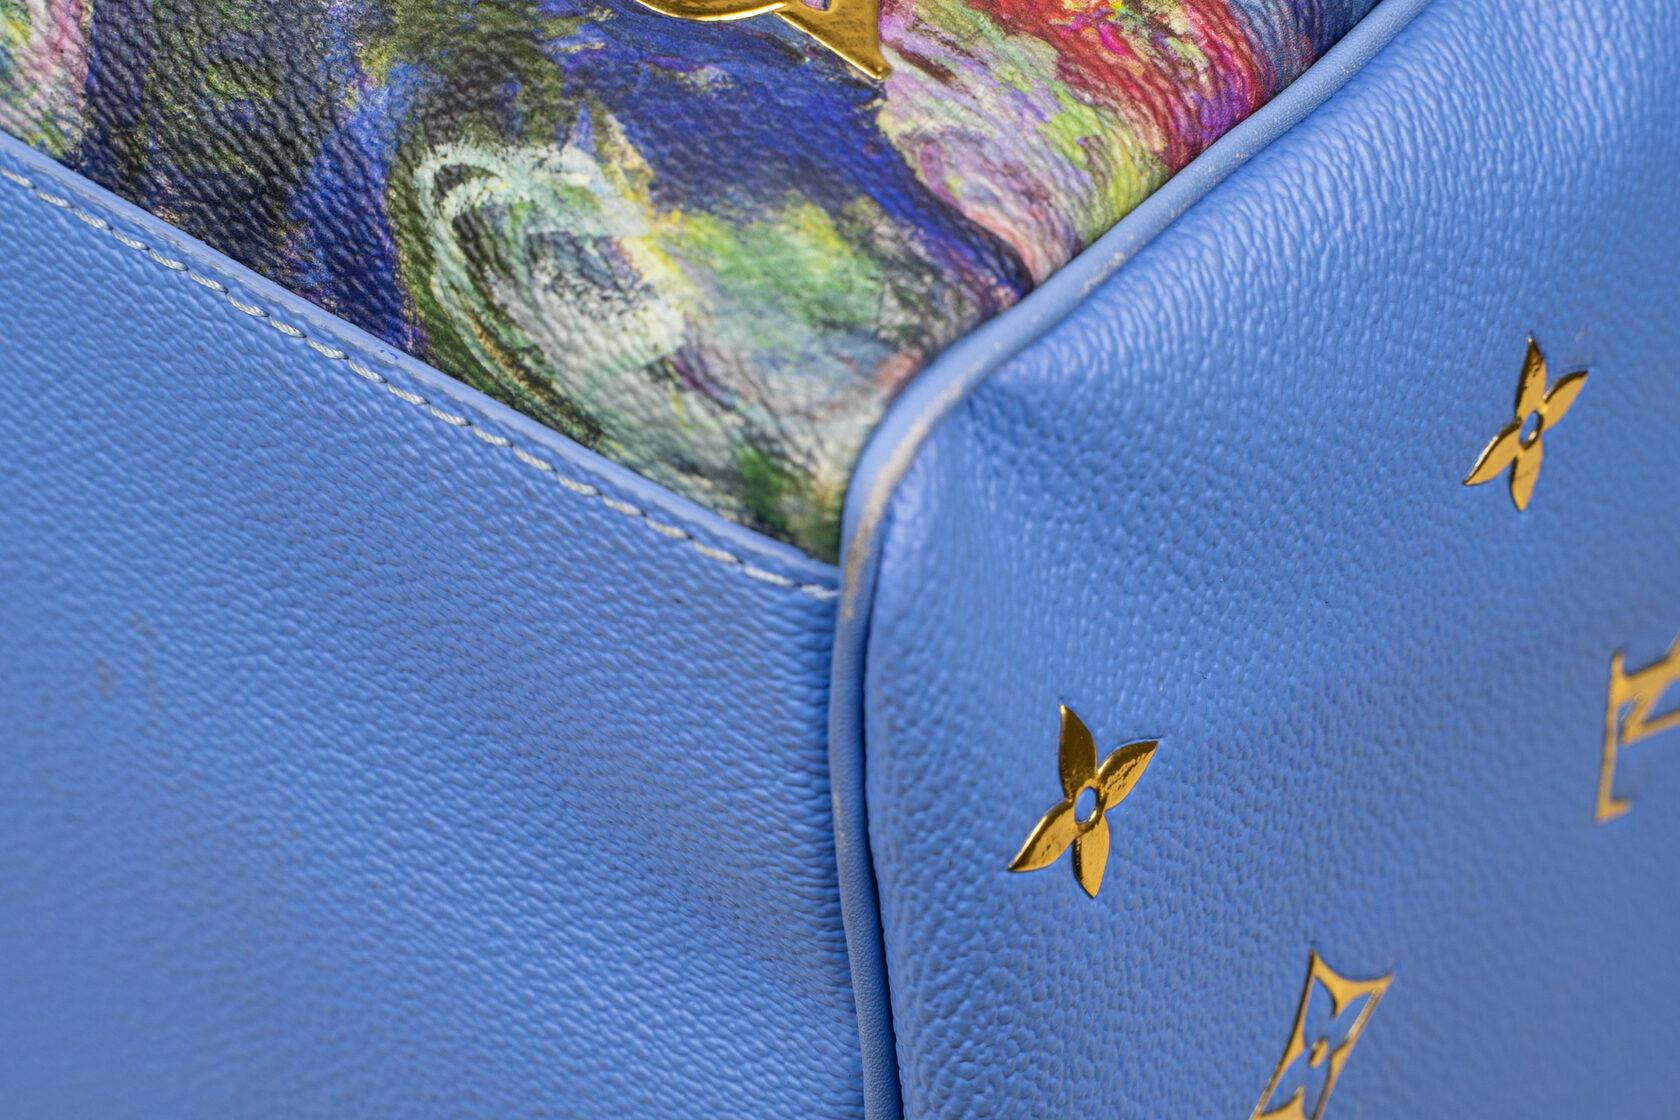 Louis Vuitton Speedy 30 Limited Edition with designer Jeff Coons - Claude Monet For Sale 2